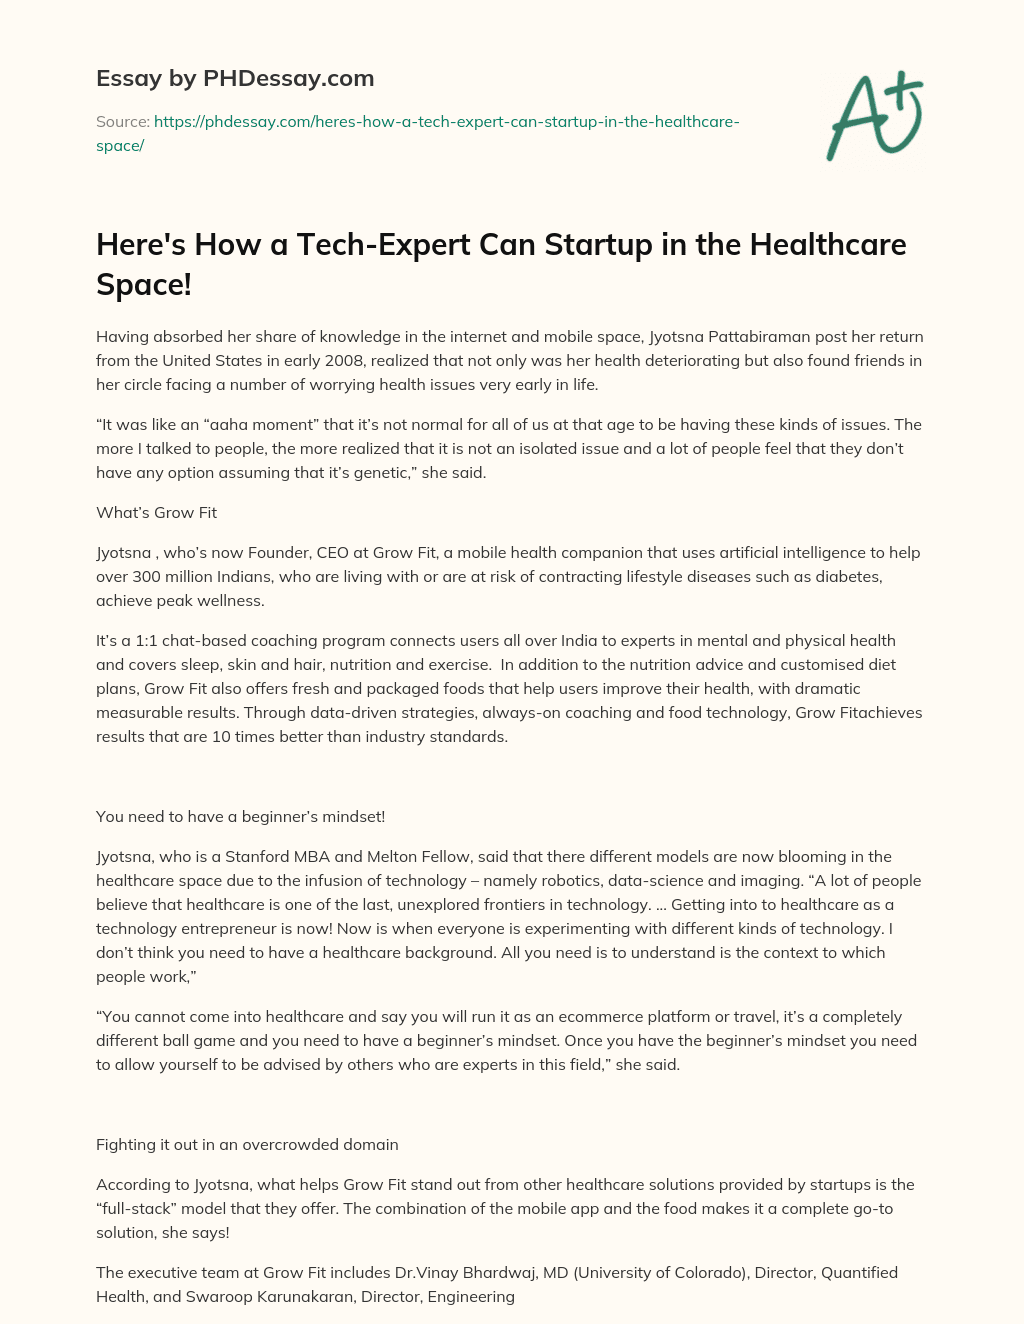 Here’s How a Tech-Expert Can Startup in the Healthcare Space! essay